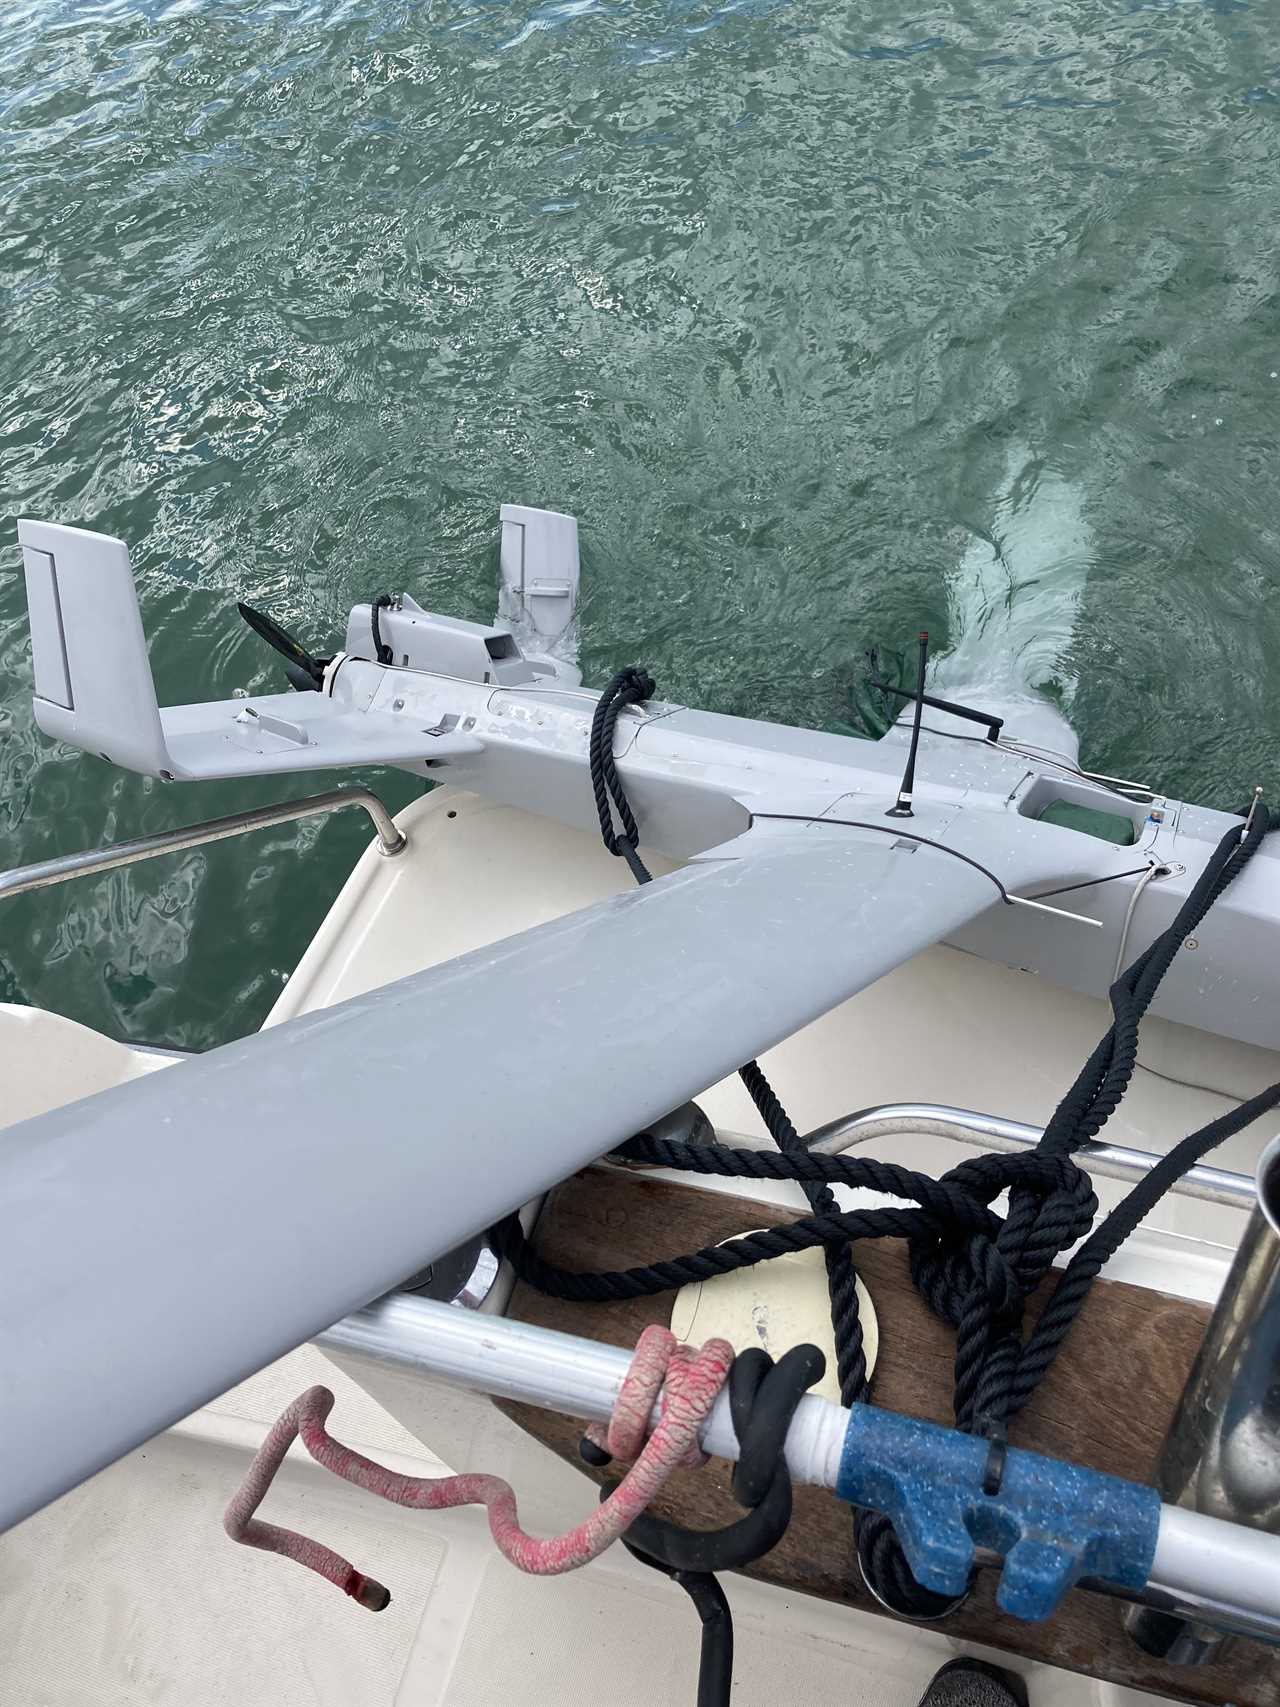 As hundreds of migrants wait to cross the Channel, a £420k drone designed to stop them falls into the sea